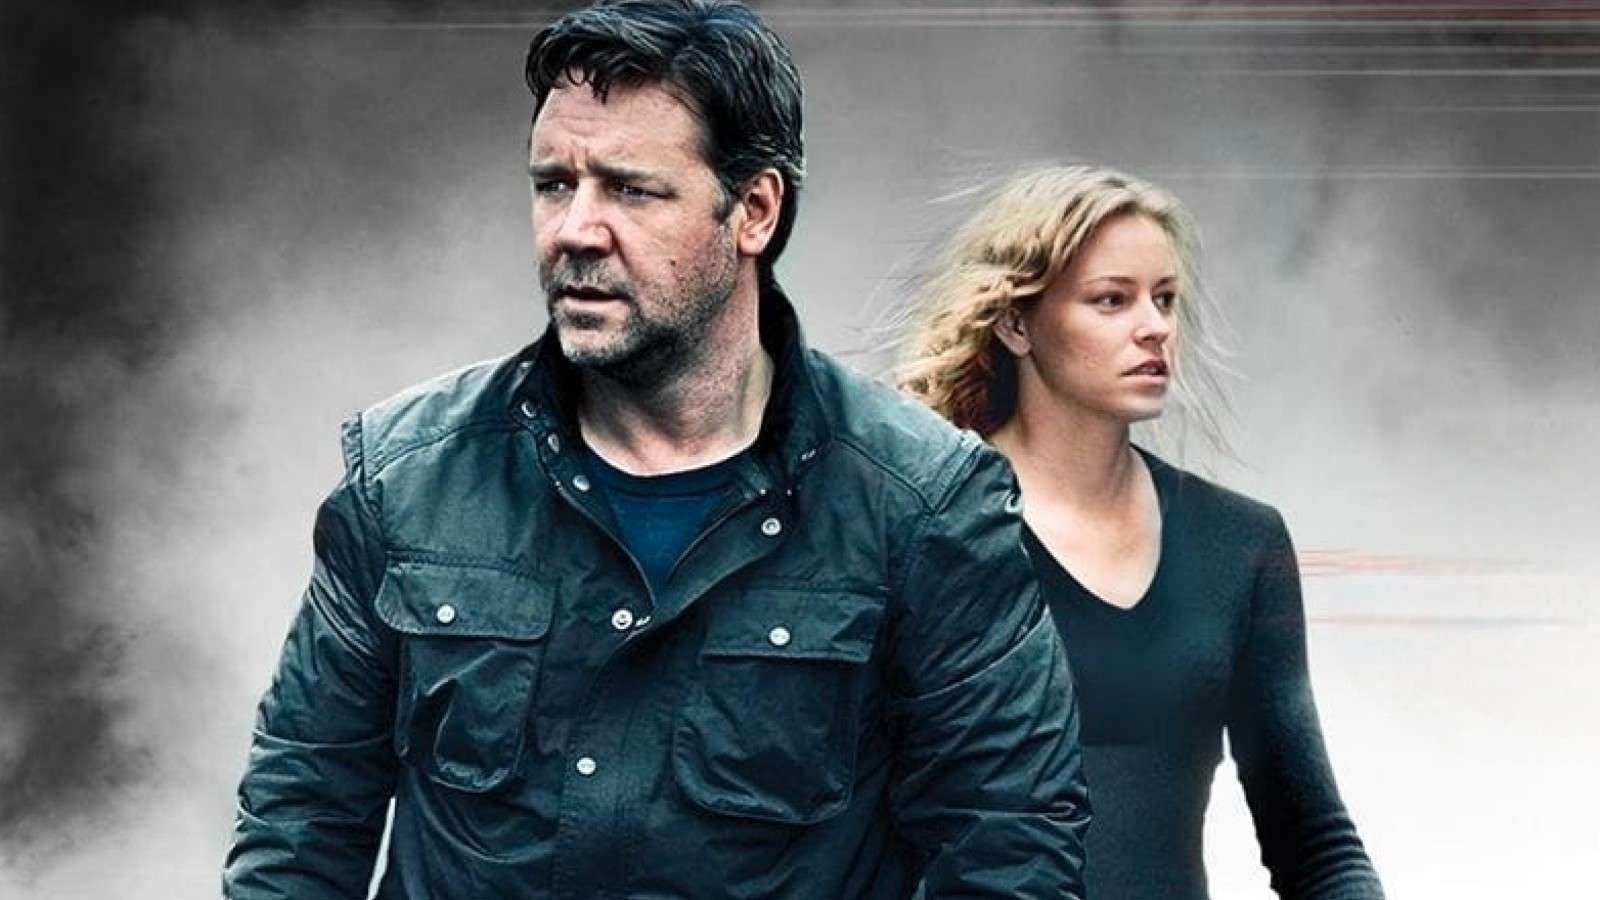 Russell Crowe and Elizabeth Banks on the poster for The Next Three Days